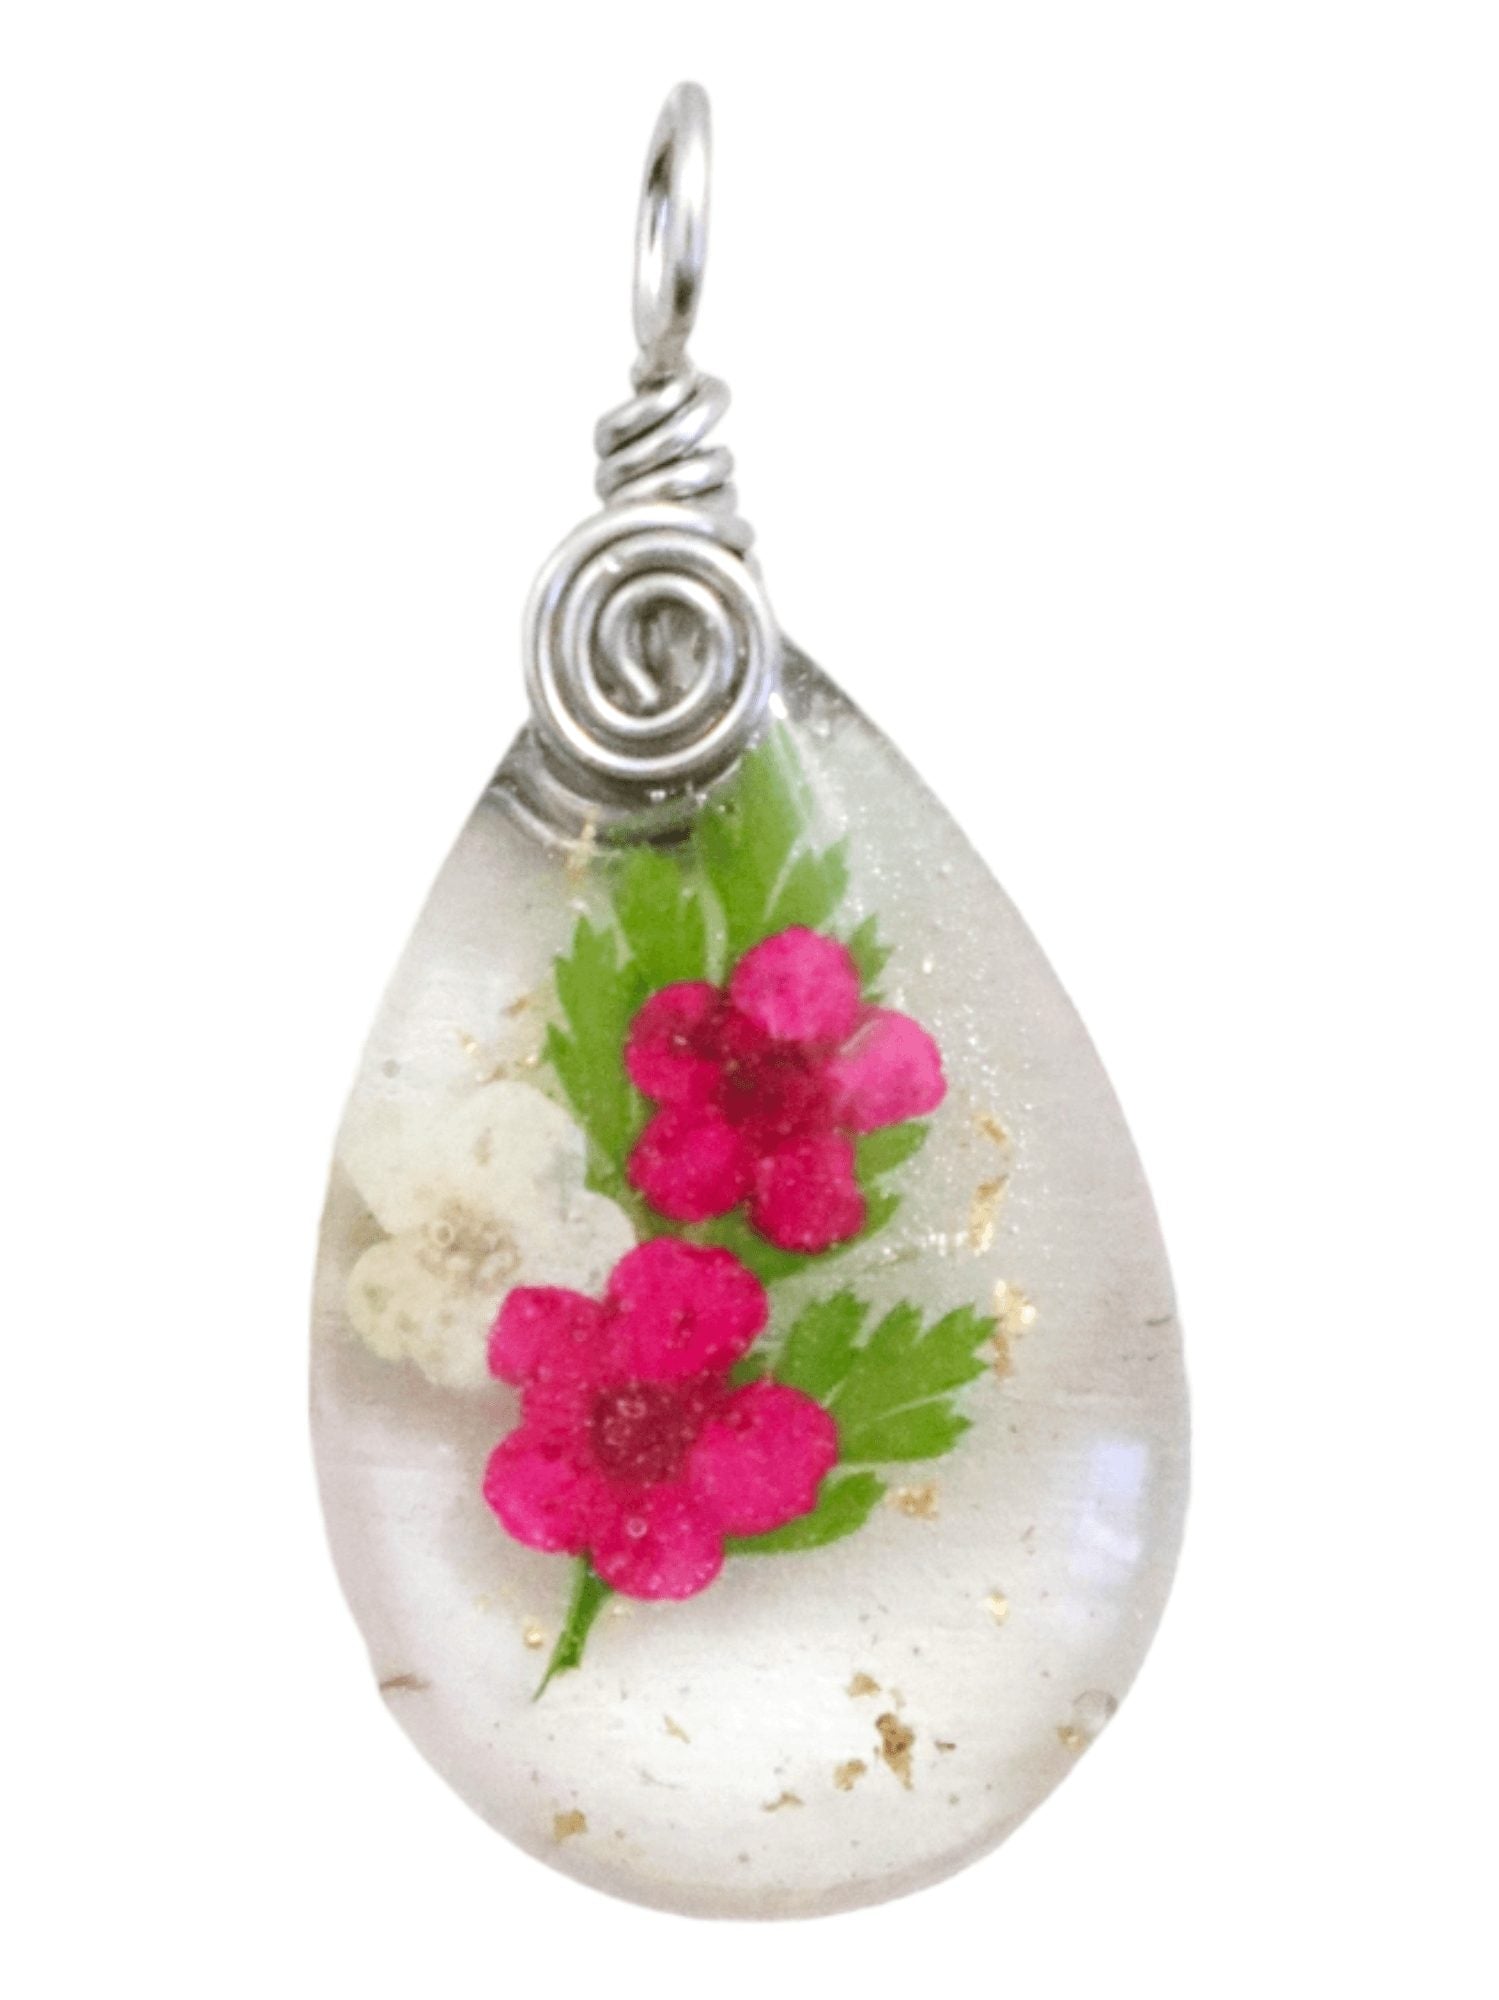 Teardrop-Resin-Pendant-With-Real-Flowers-and-Gold-Flakes-Kaleidoscopes-And-Polka-Dots.